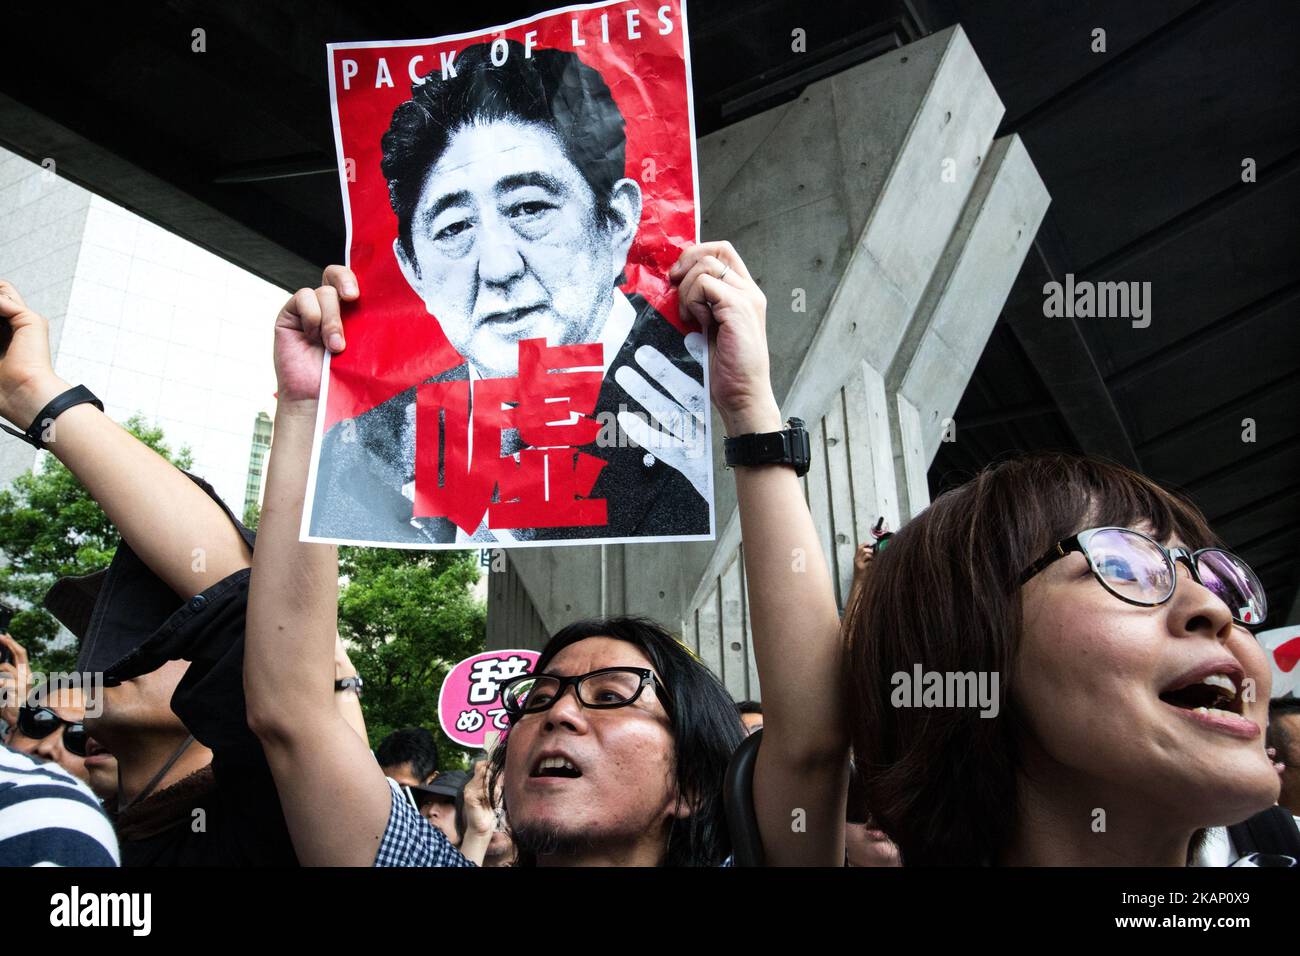 Anti-Abe protesters gathers and chant “Abe wa Yamero!” "Resign Prime Minister Abe!” during the speech of Japanese Prime Minister Shinzo Abe for his candidate Aya Nakamura of main opposition, Liberal Democratic Party (LDP) in Akihabara, Tokyo, Japan on July 1, 2017. Tokyo Metropolitan Assembly election will be held on July 2. (Photo by Richard Atrero de Guzman/NurPhoto) *** Please Use Credit from Credit Field *** Stock Photo